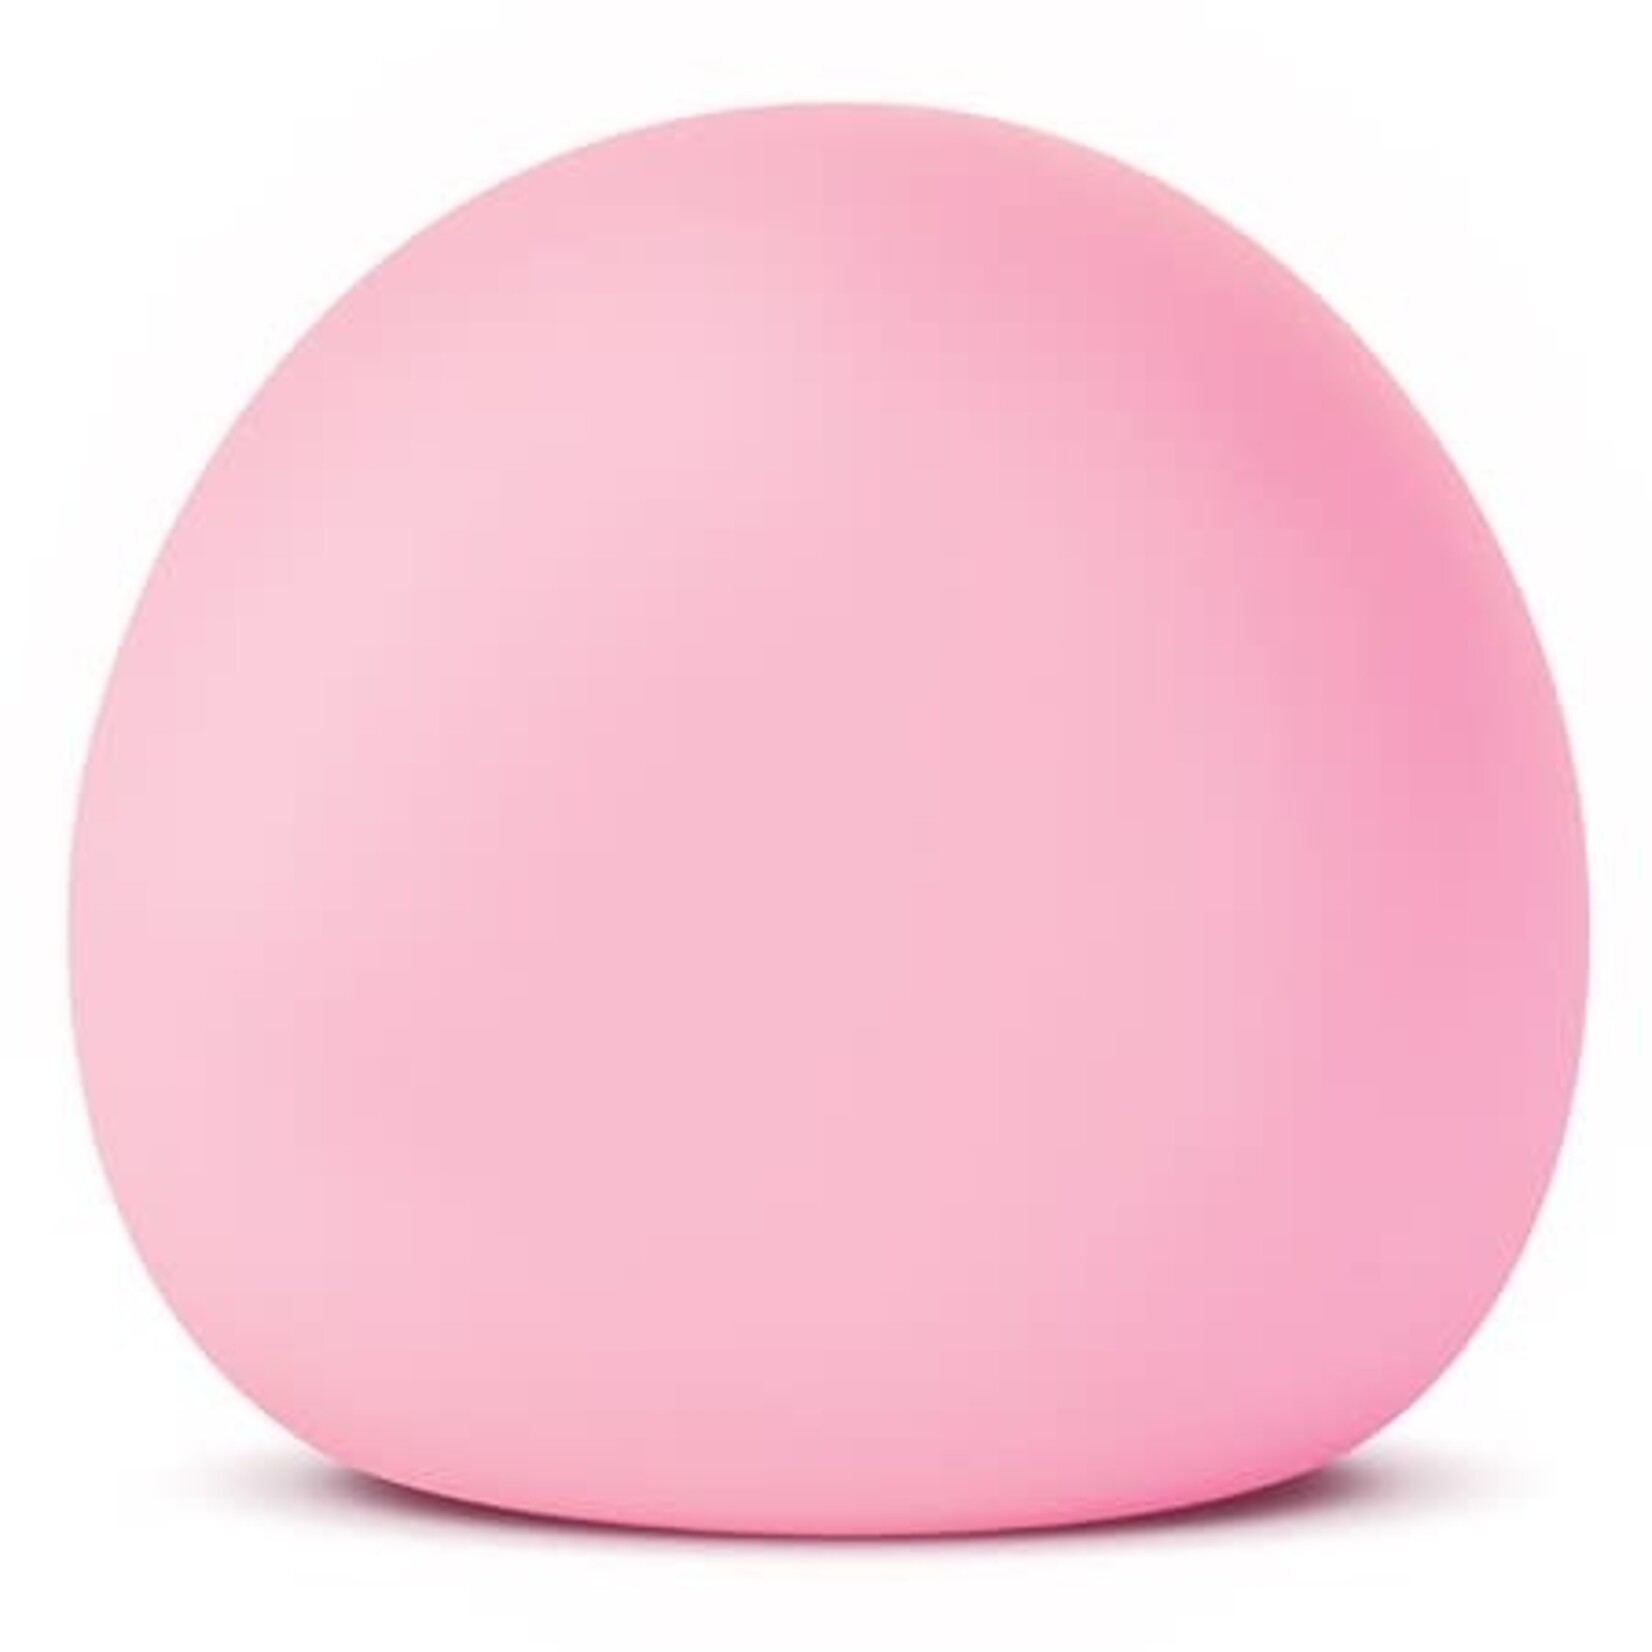 PLAY VISIONS Giant Gumball Stress Ball